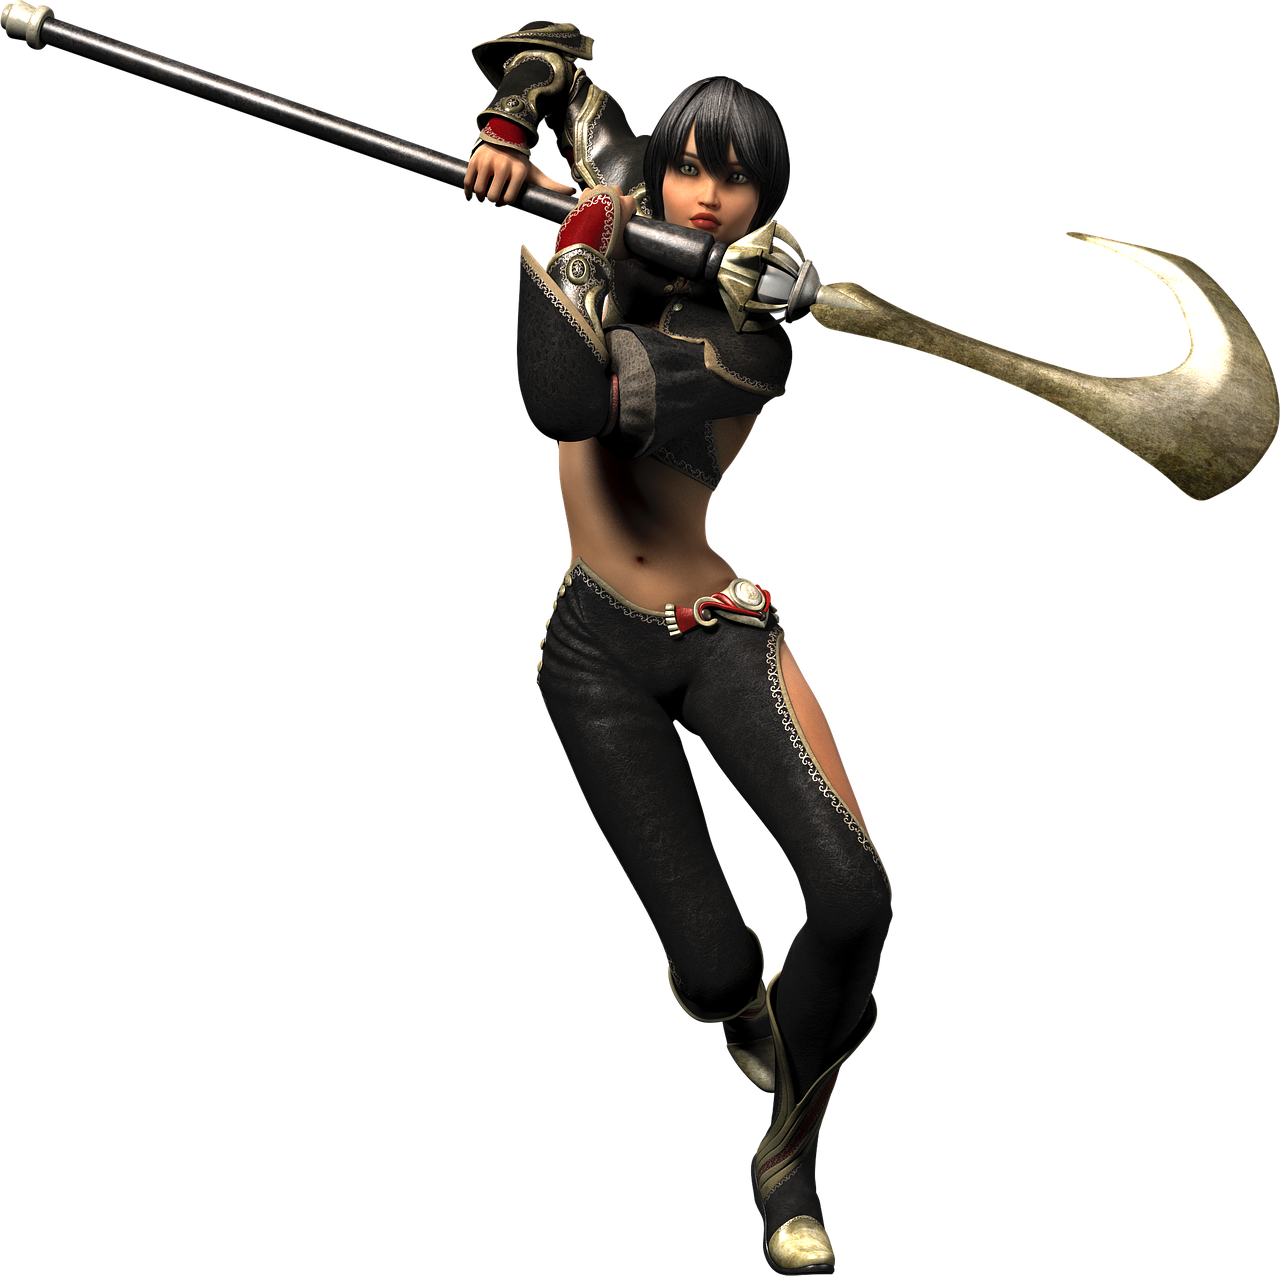 a woman with a sword on a black background, concept art, inspired by Li Shida, doing a sassy pose, soul calibur, noire photo, sfm render